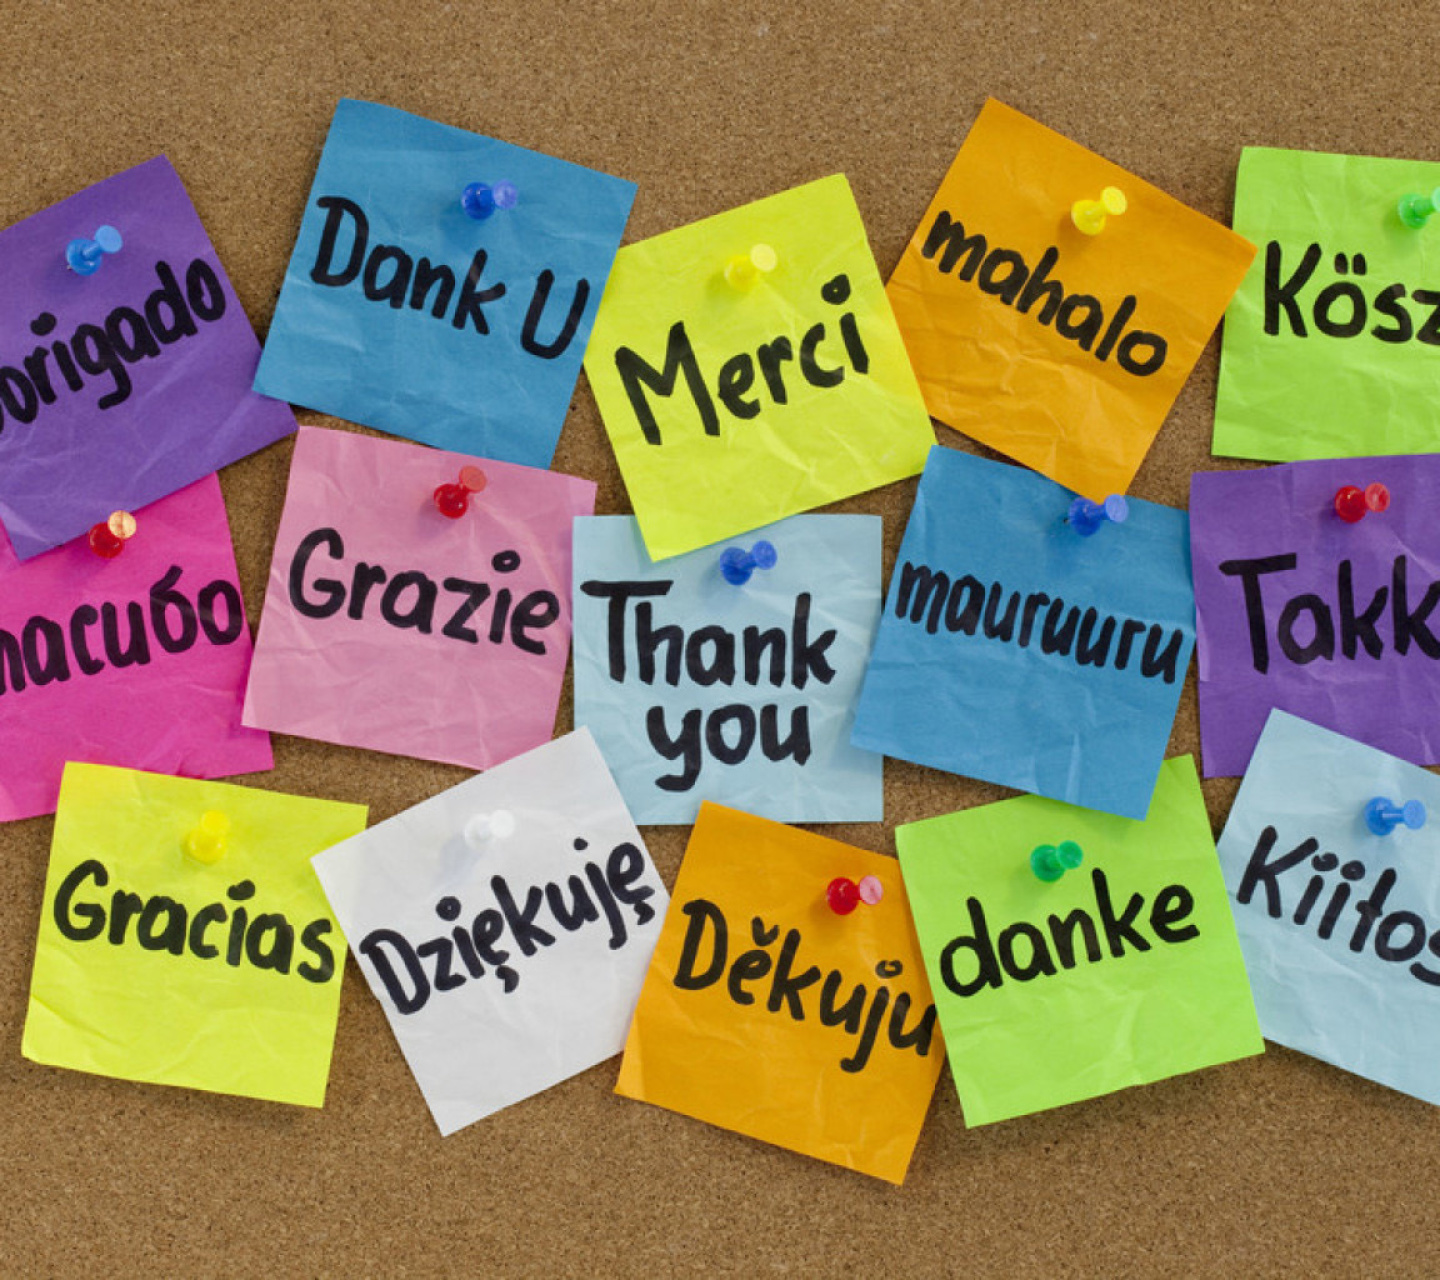 How To Say Thank You in Different Languages wallpaper 1440x1280